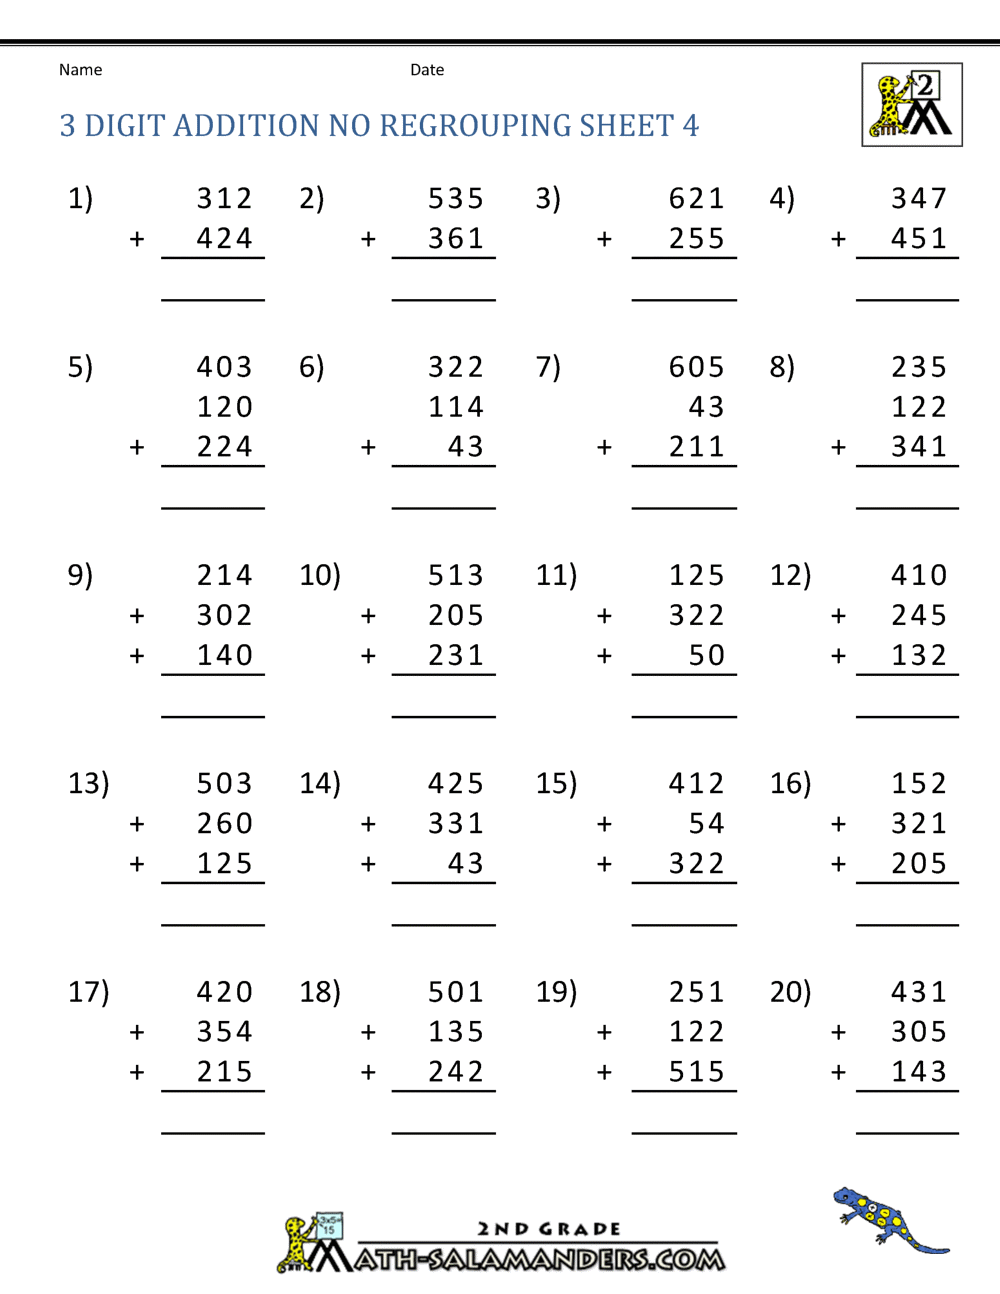 23 Digit Addition No Regrouping Worksheets In Adding Three Numbers Worksheet